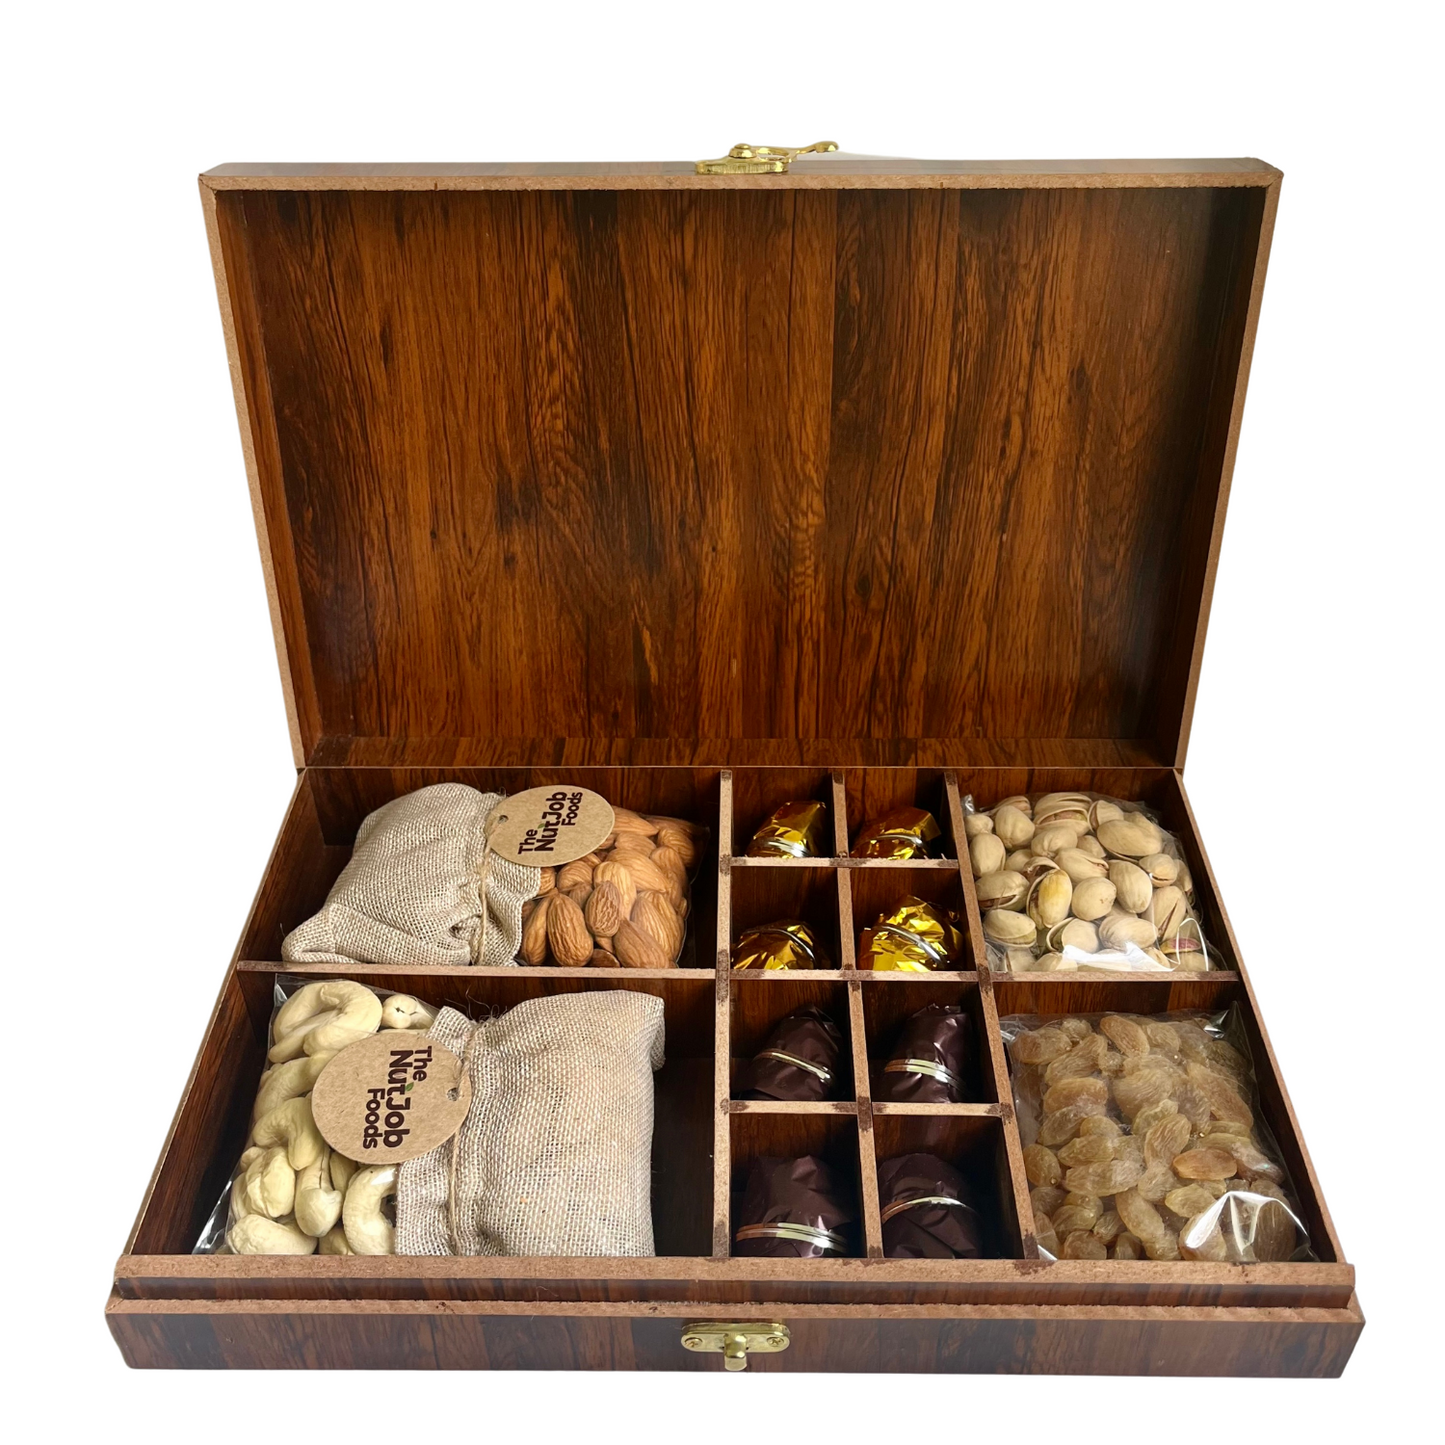 Dried Fruits & Nuts Premium Wooden Gift Box - Nuts, Dried Fruits, Chocolate - 500g